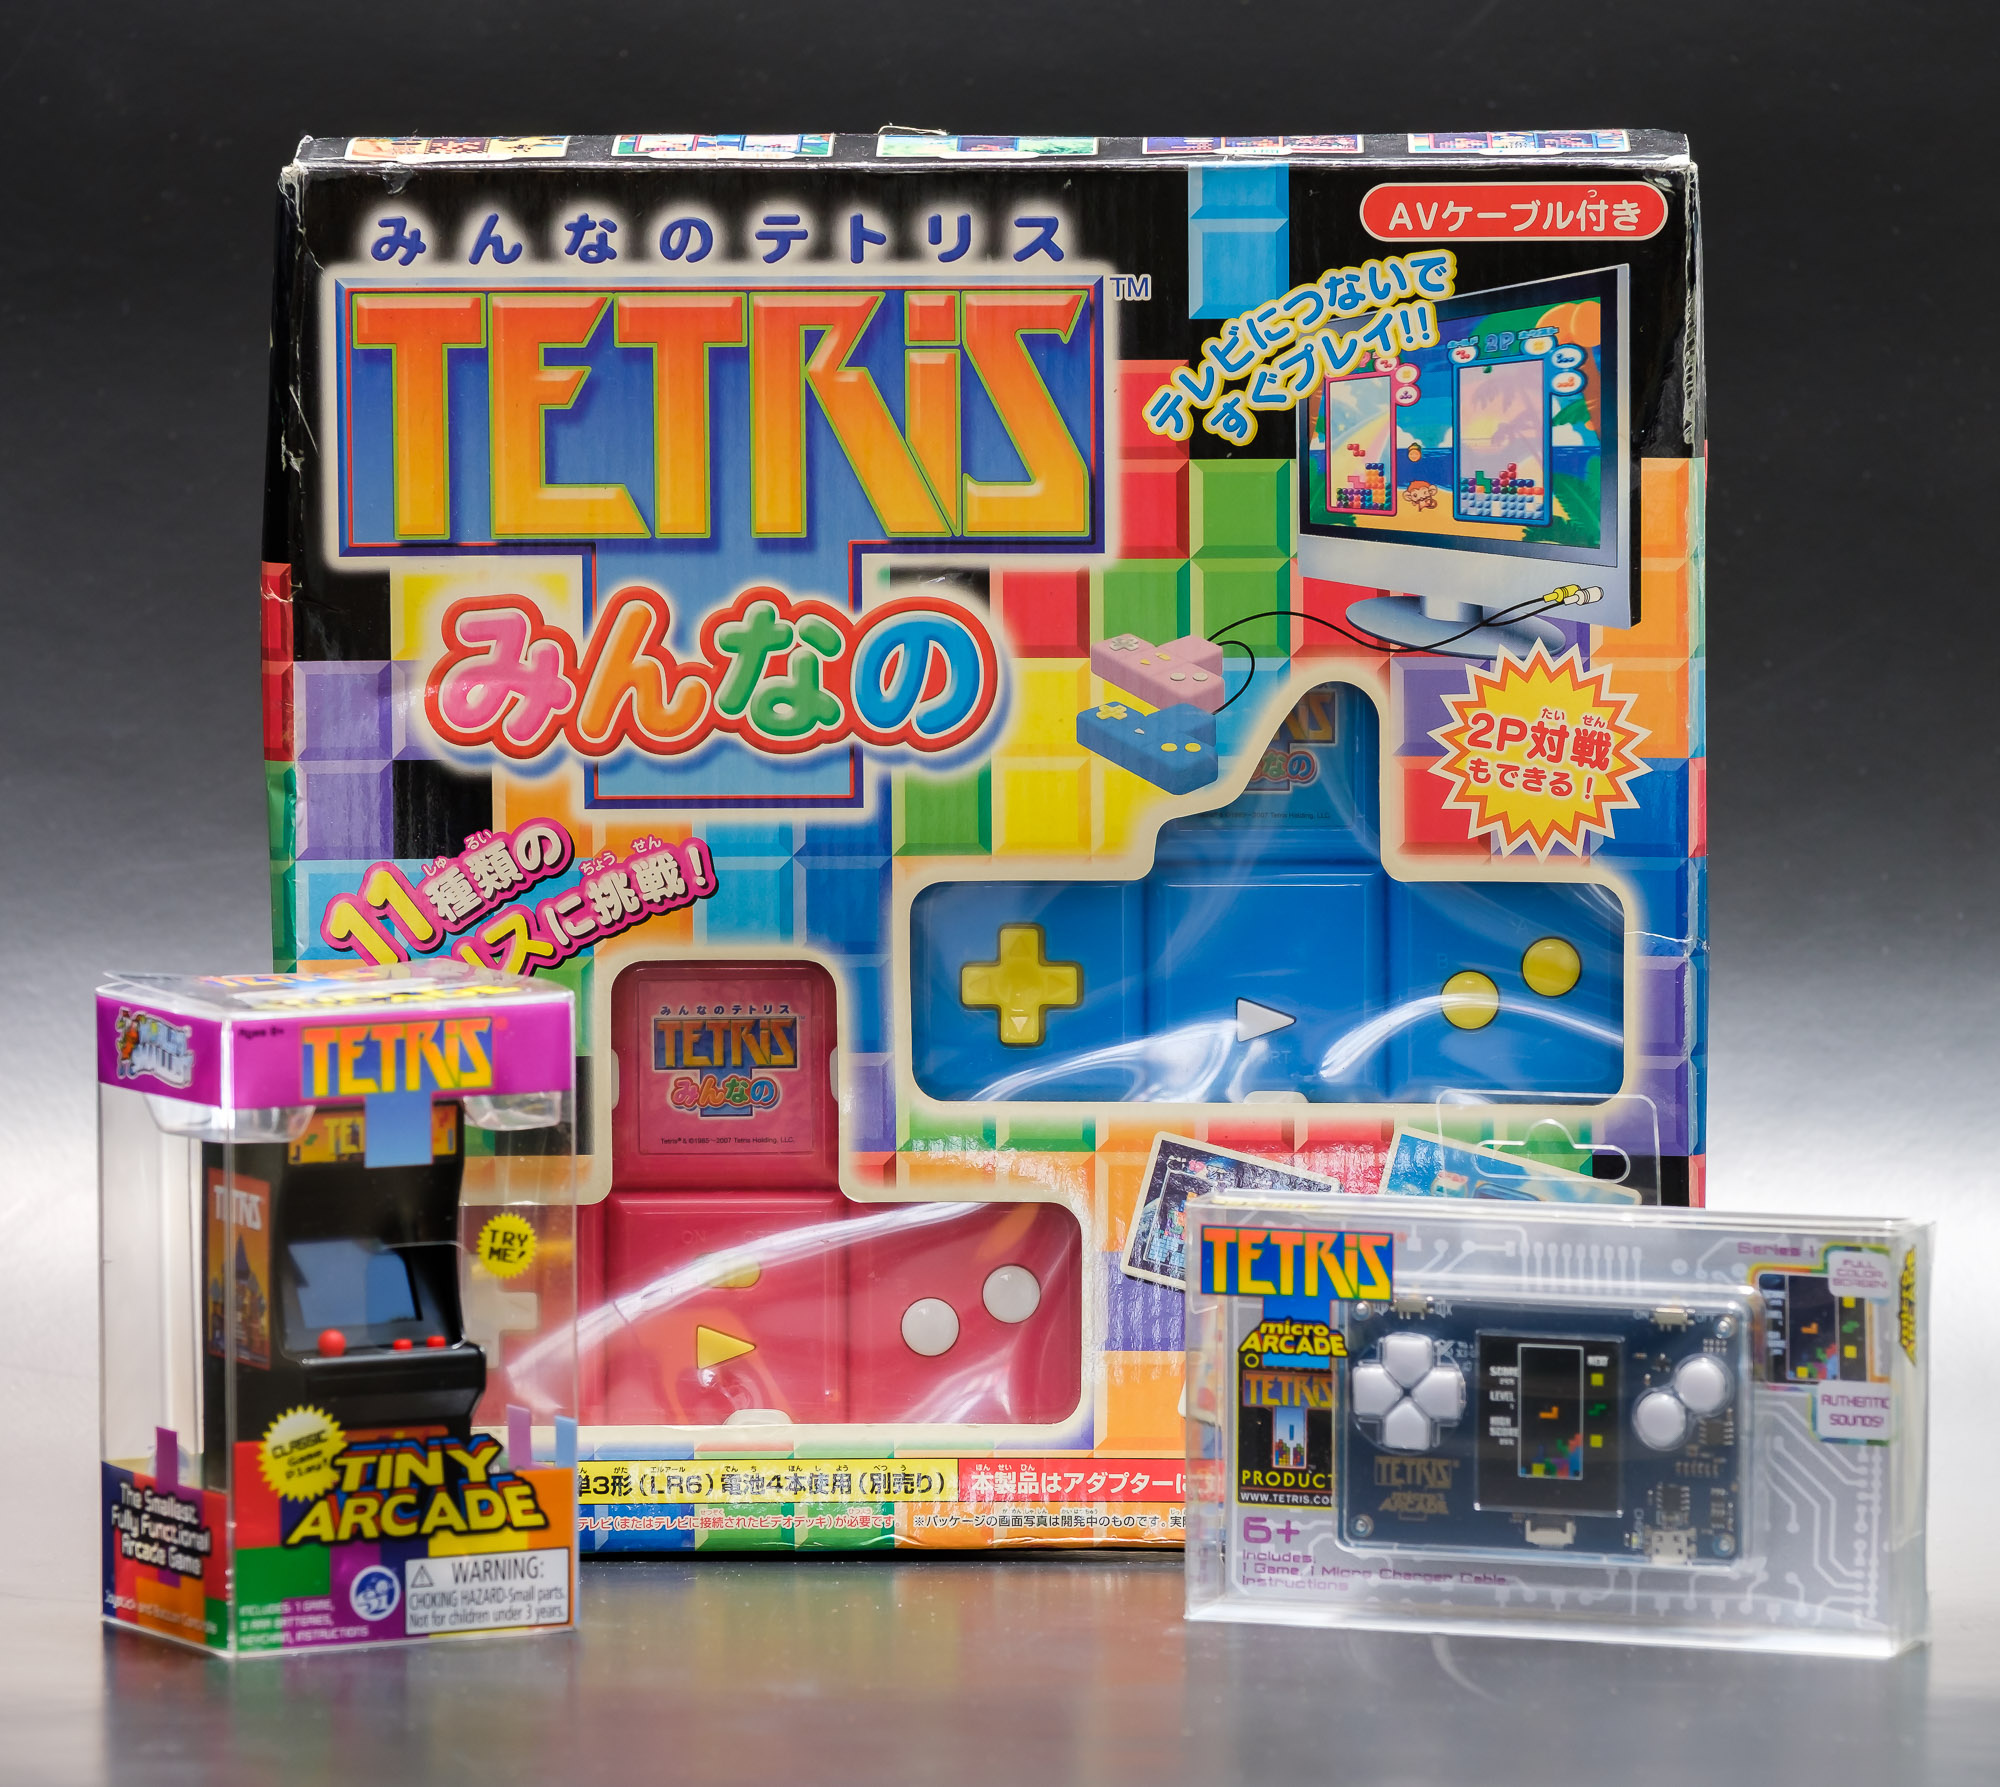 Tetris collection update, Plug-n-Play!